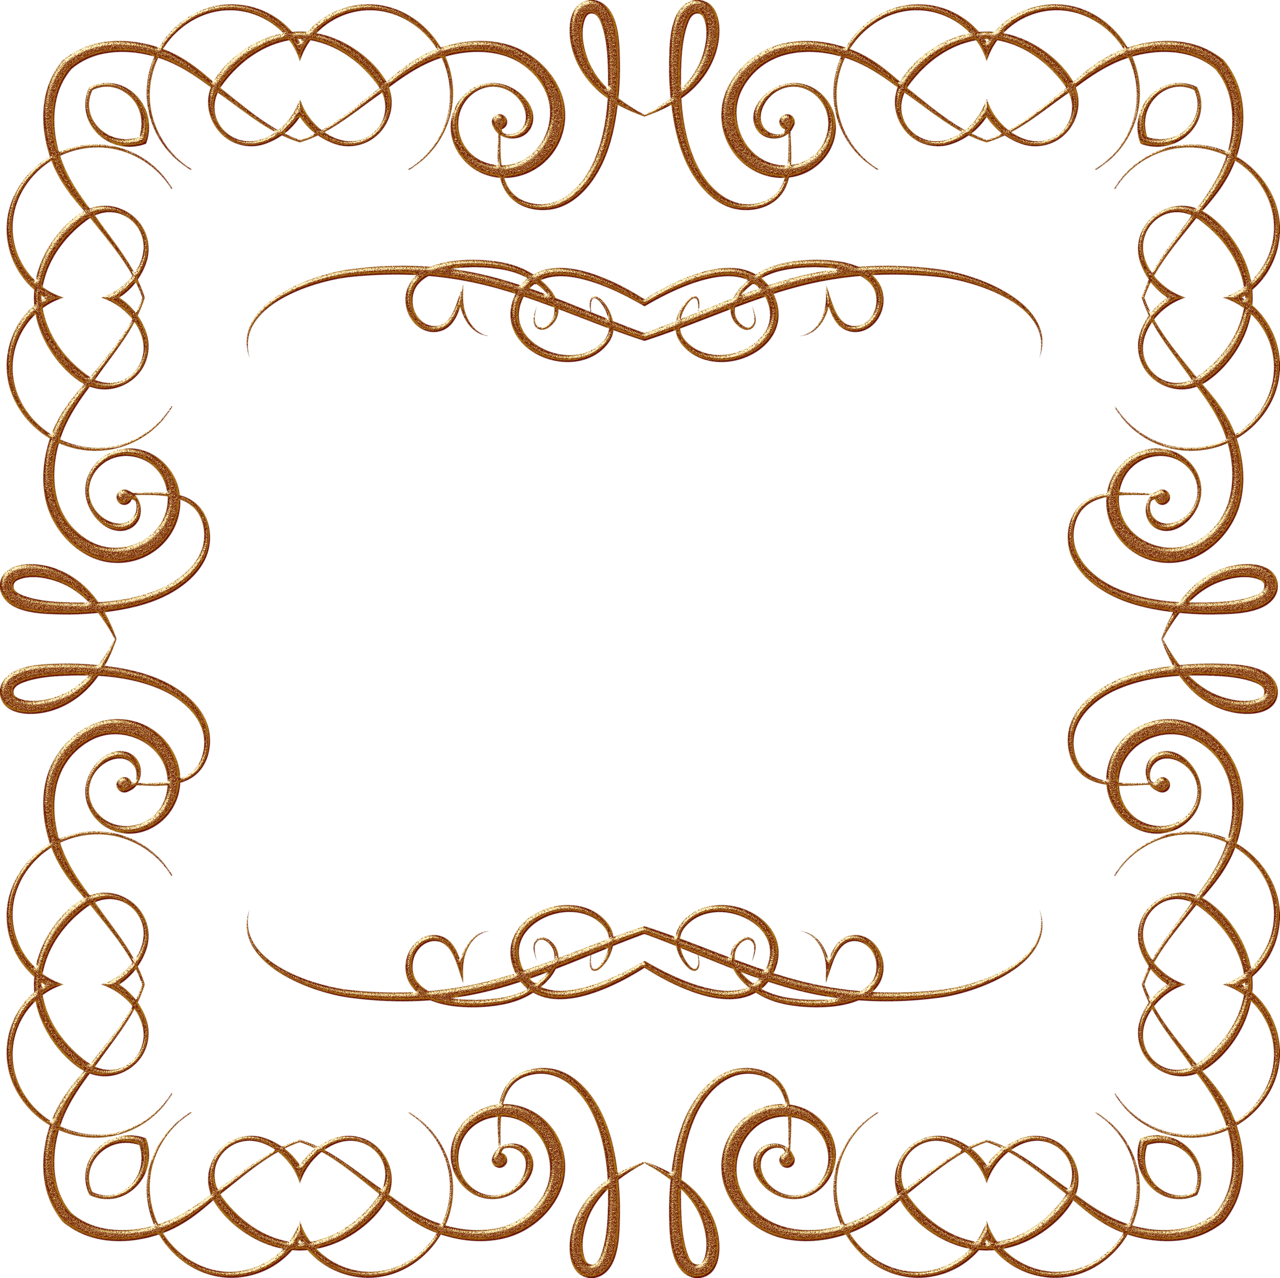 Painting Gold Picture Frames Clip Art - Painting Gold Picture Frames Clip Art (1280x1278)